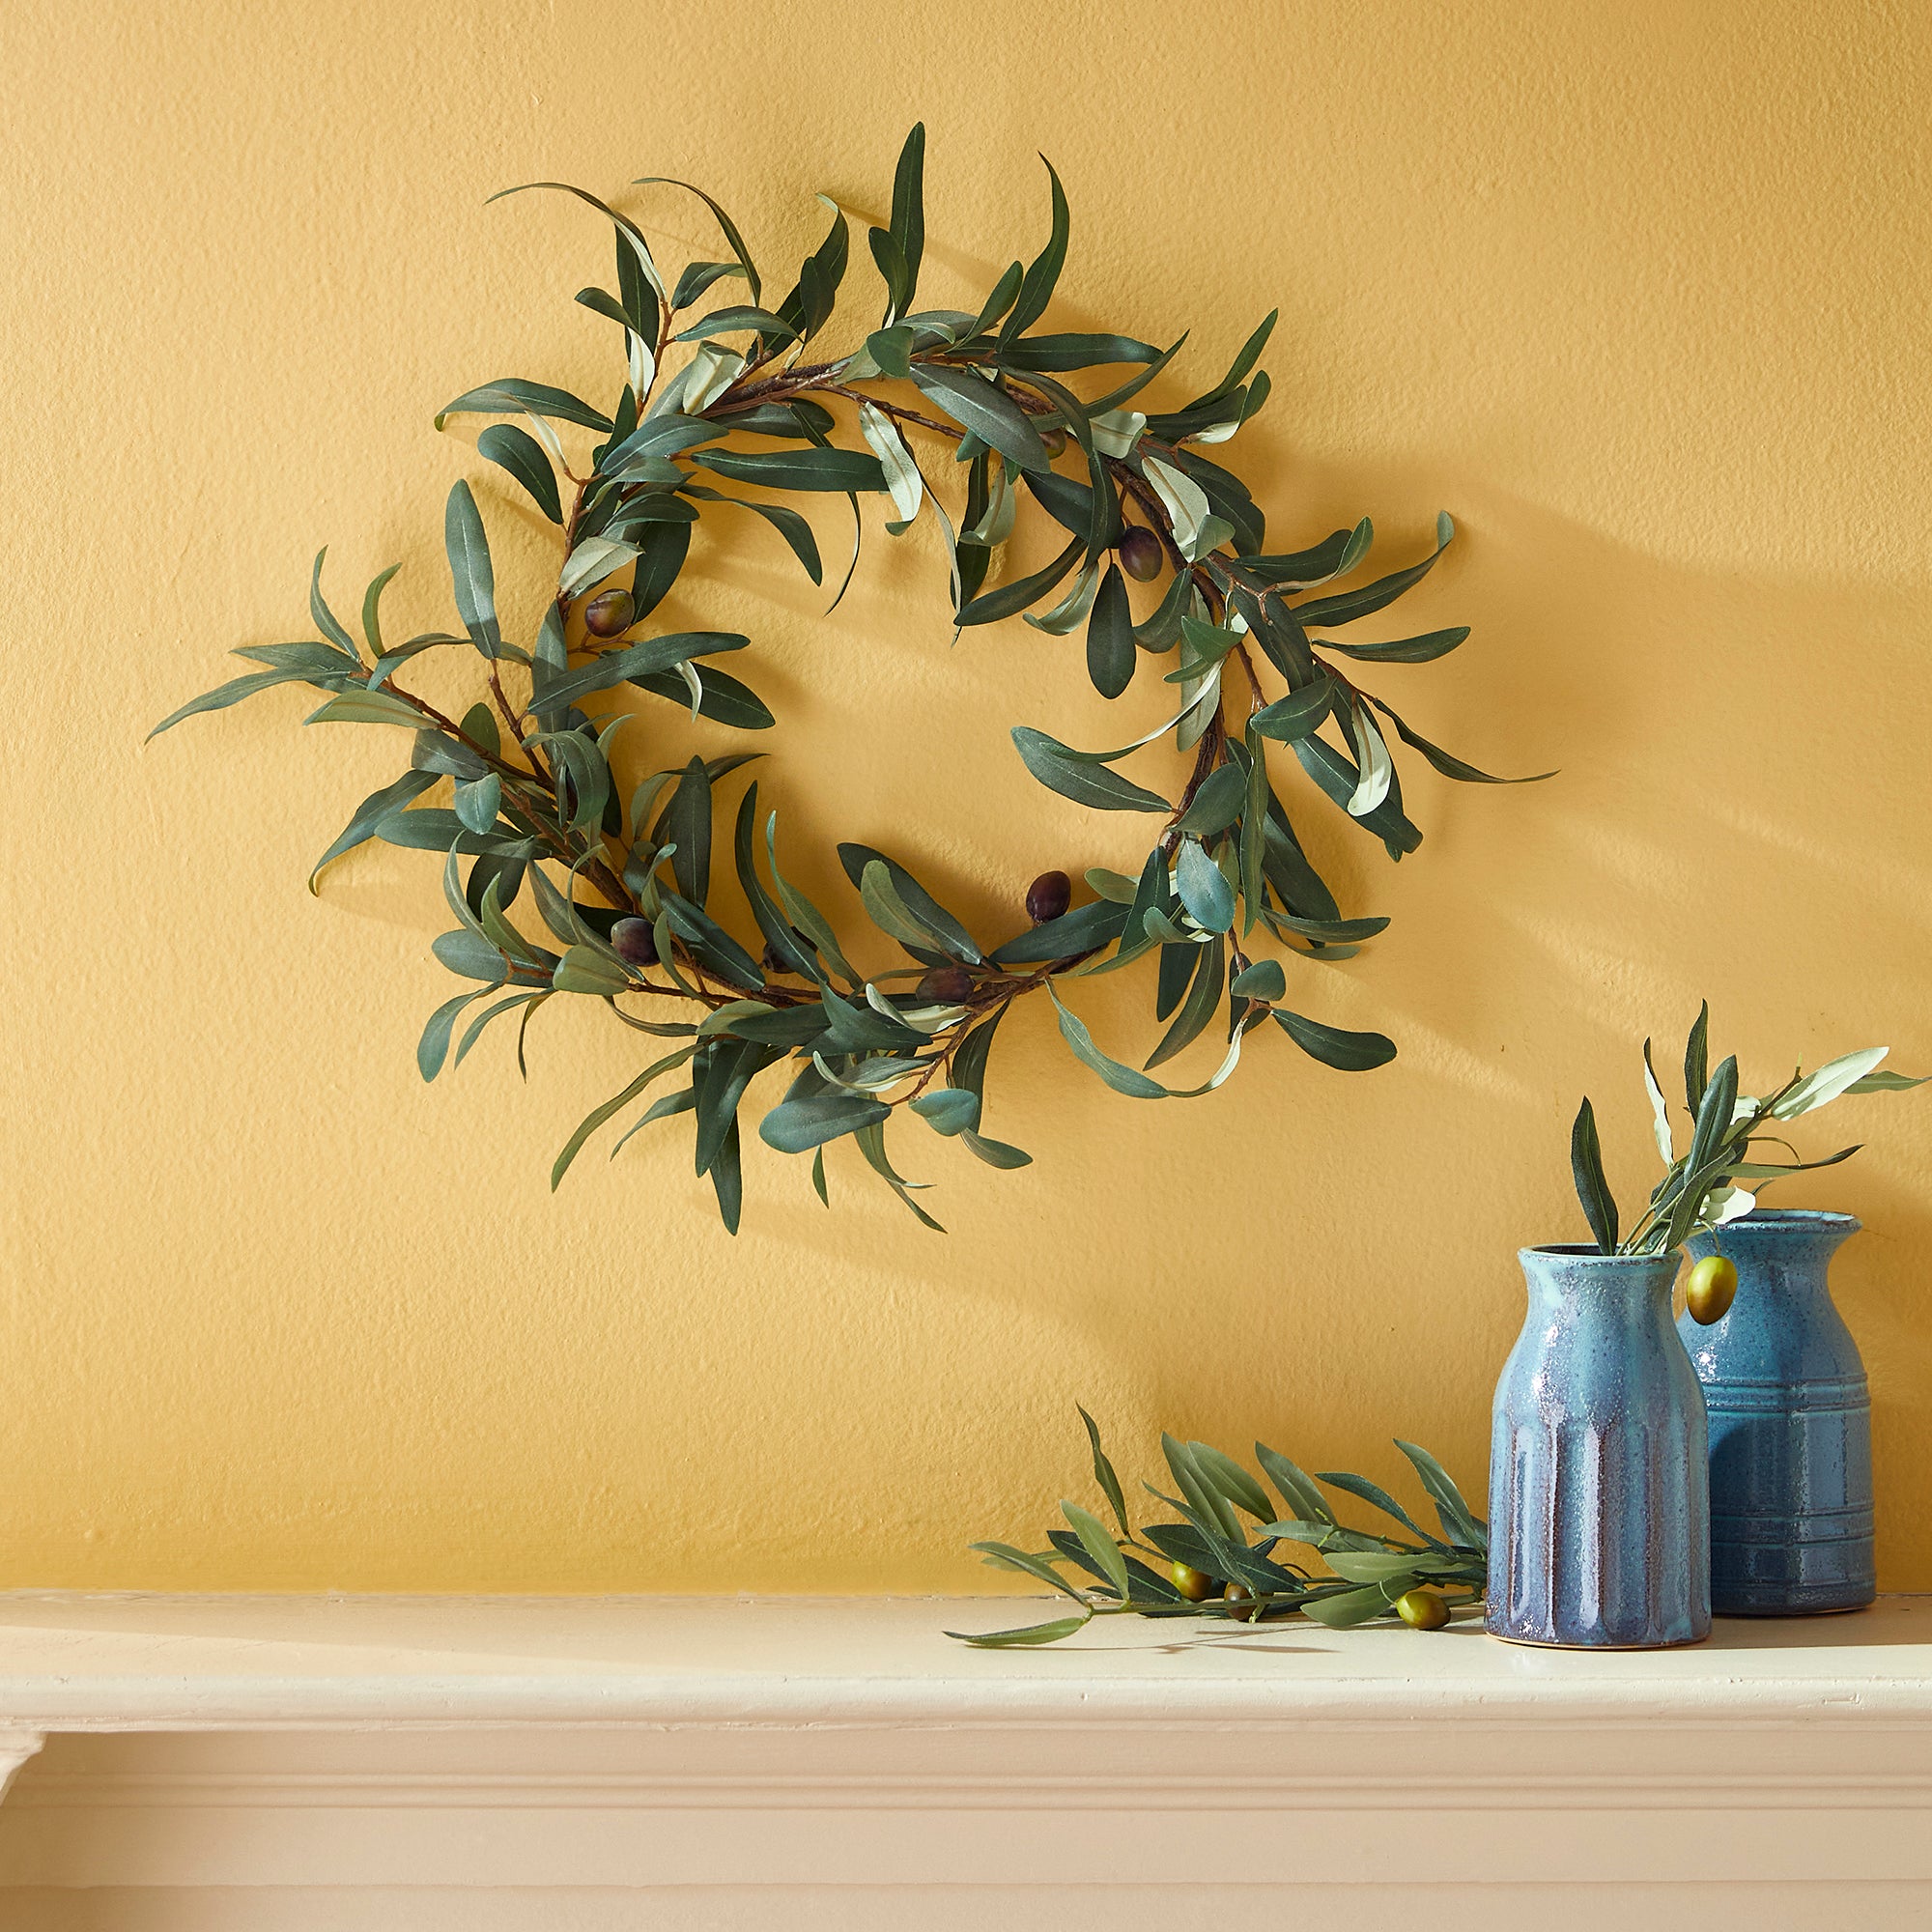 The olive wreath is a charming accent for any space needing a touch of warmth. Distinctive and refined, it's no wonder this Mediterranean beauty has stood the test of time. Amethyst Home provides interior design, new construction, custom furniture, and area rugs in the Kansas City metro area.